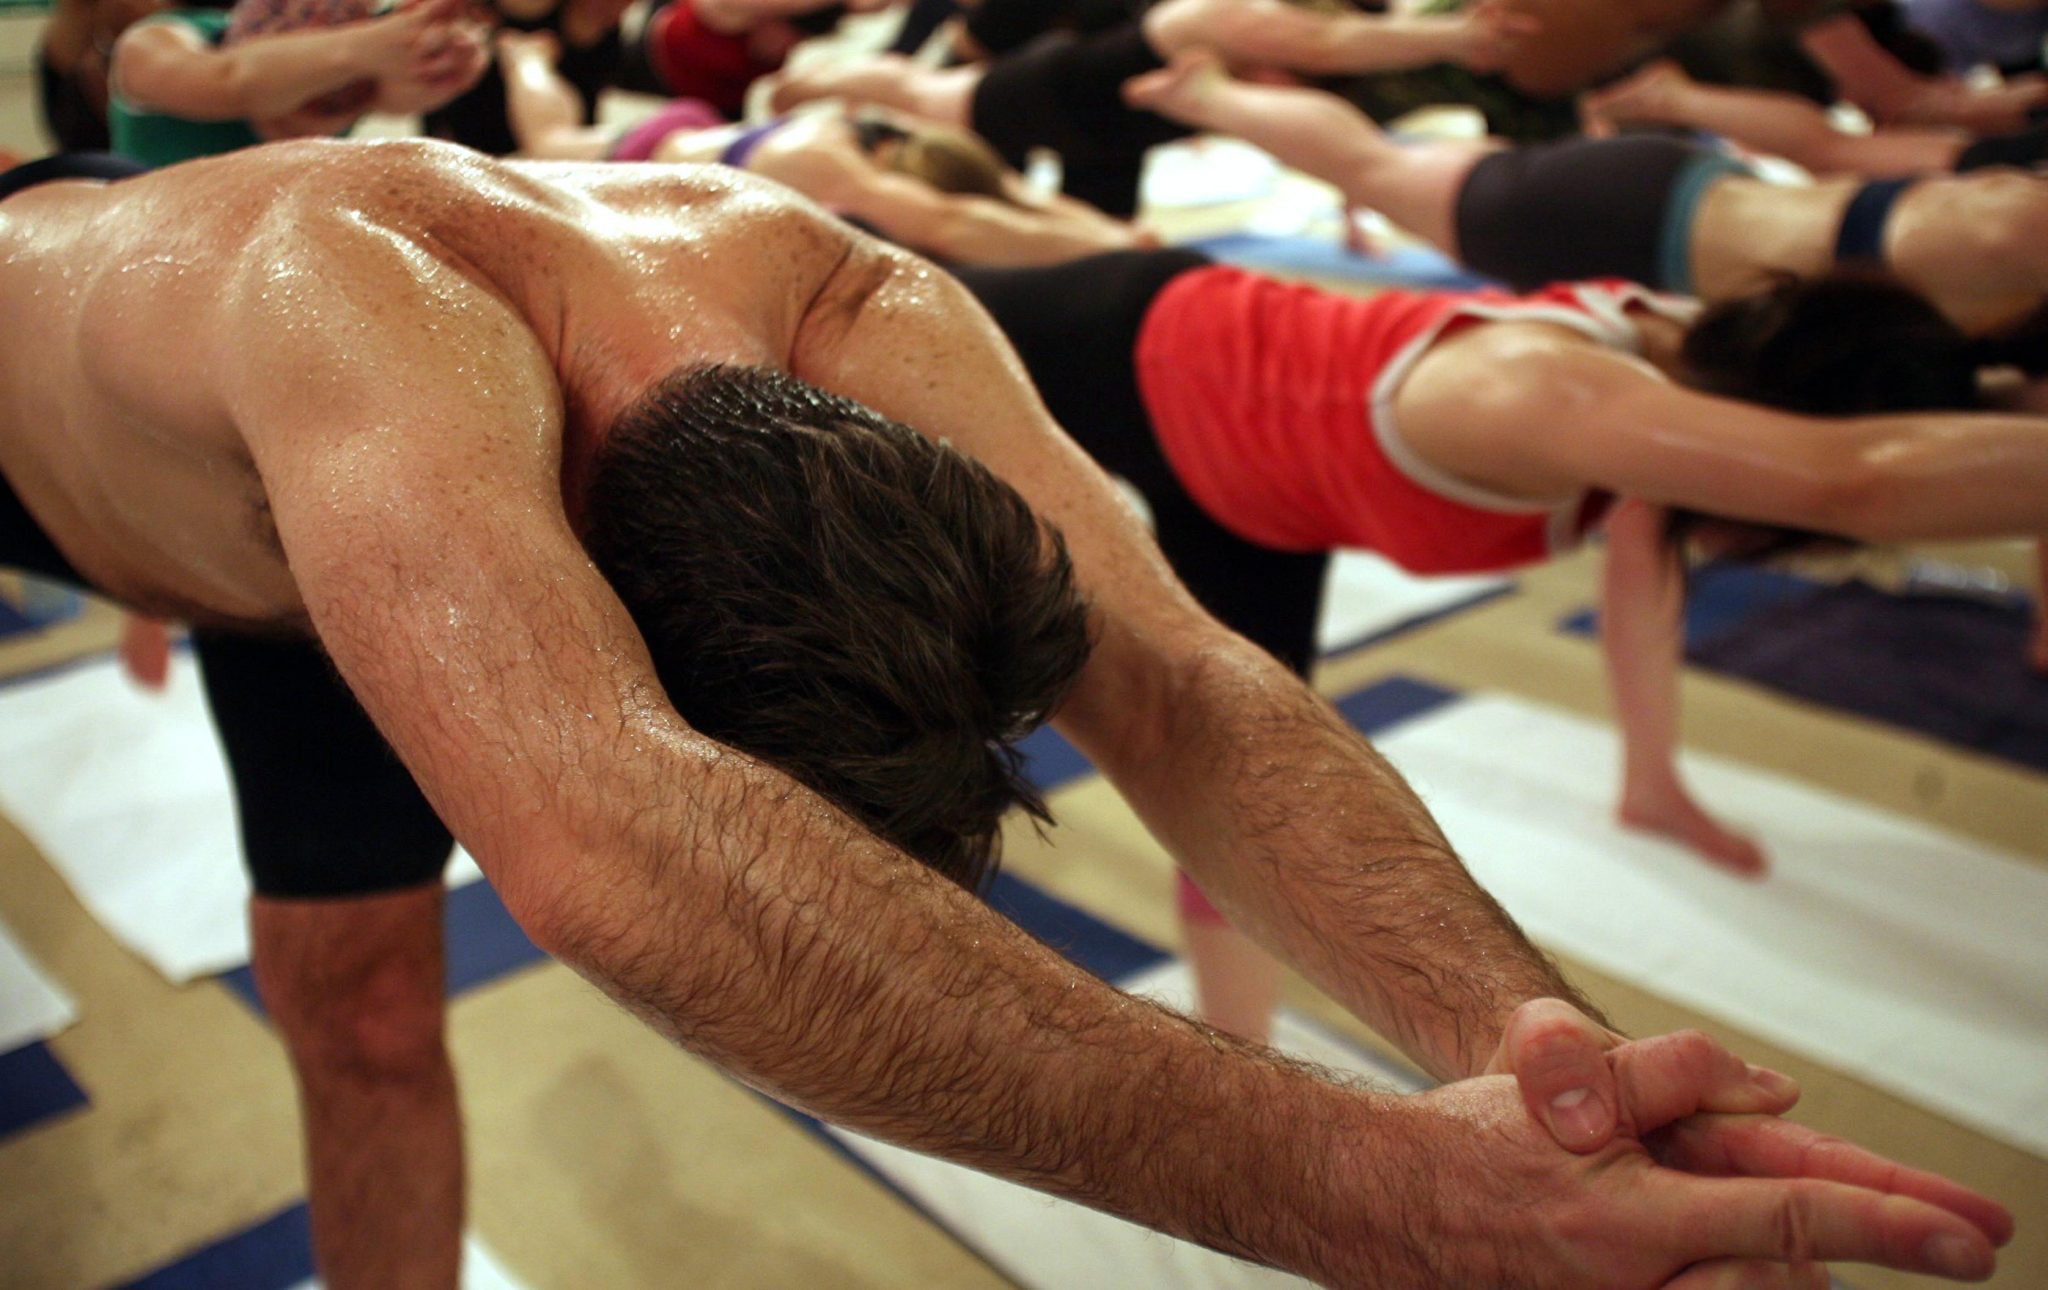 What You Need to Know About Bikram Yoga